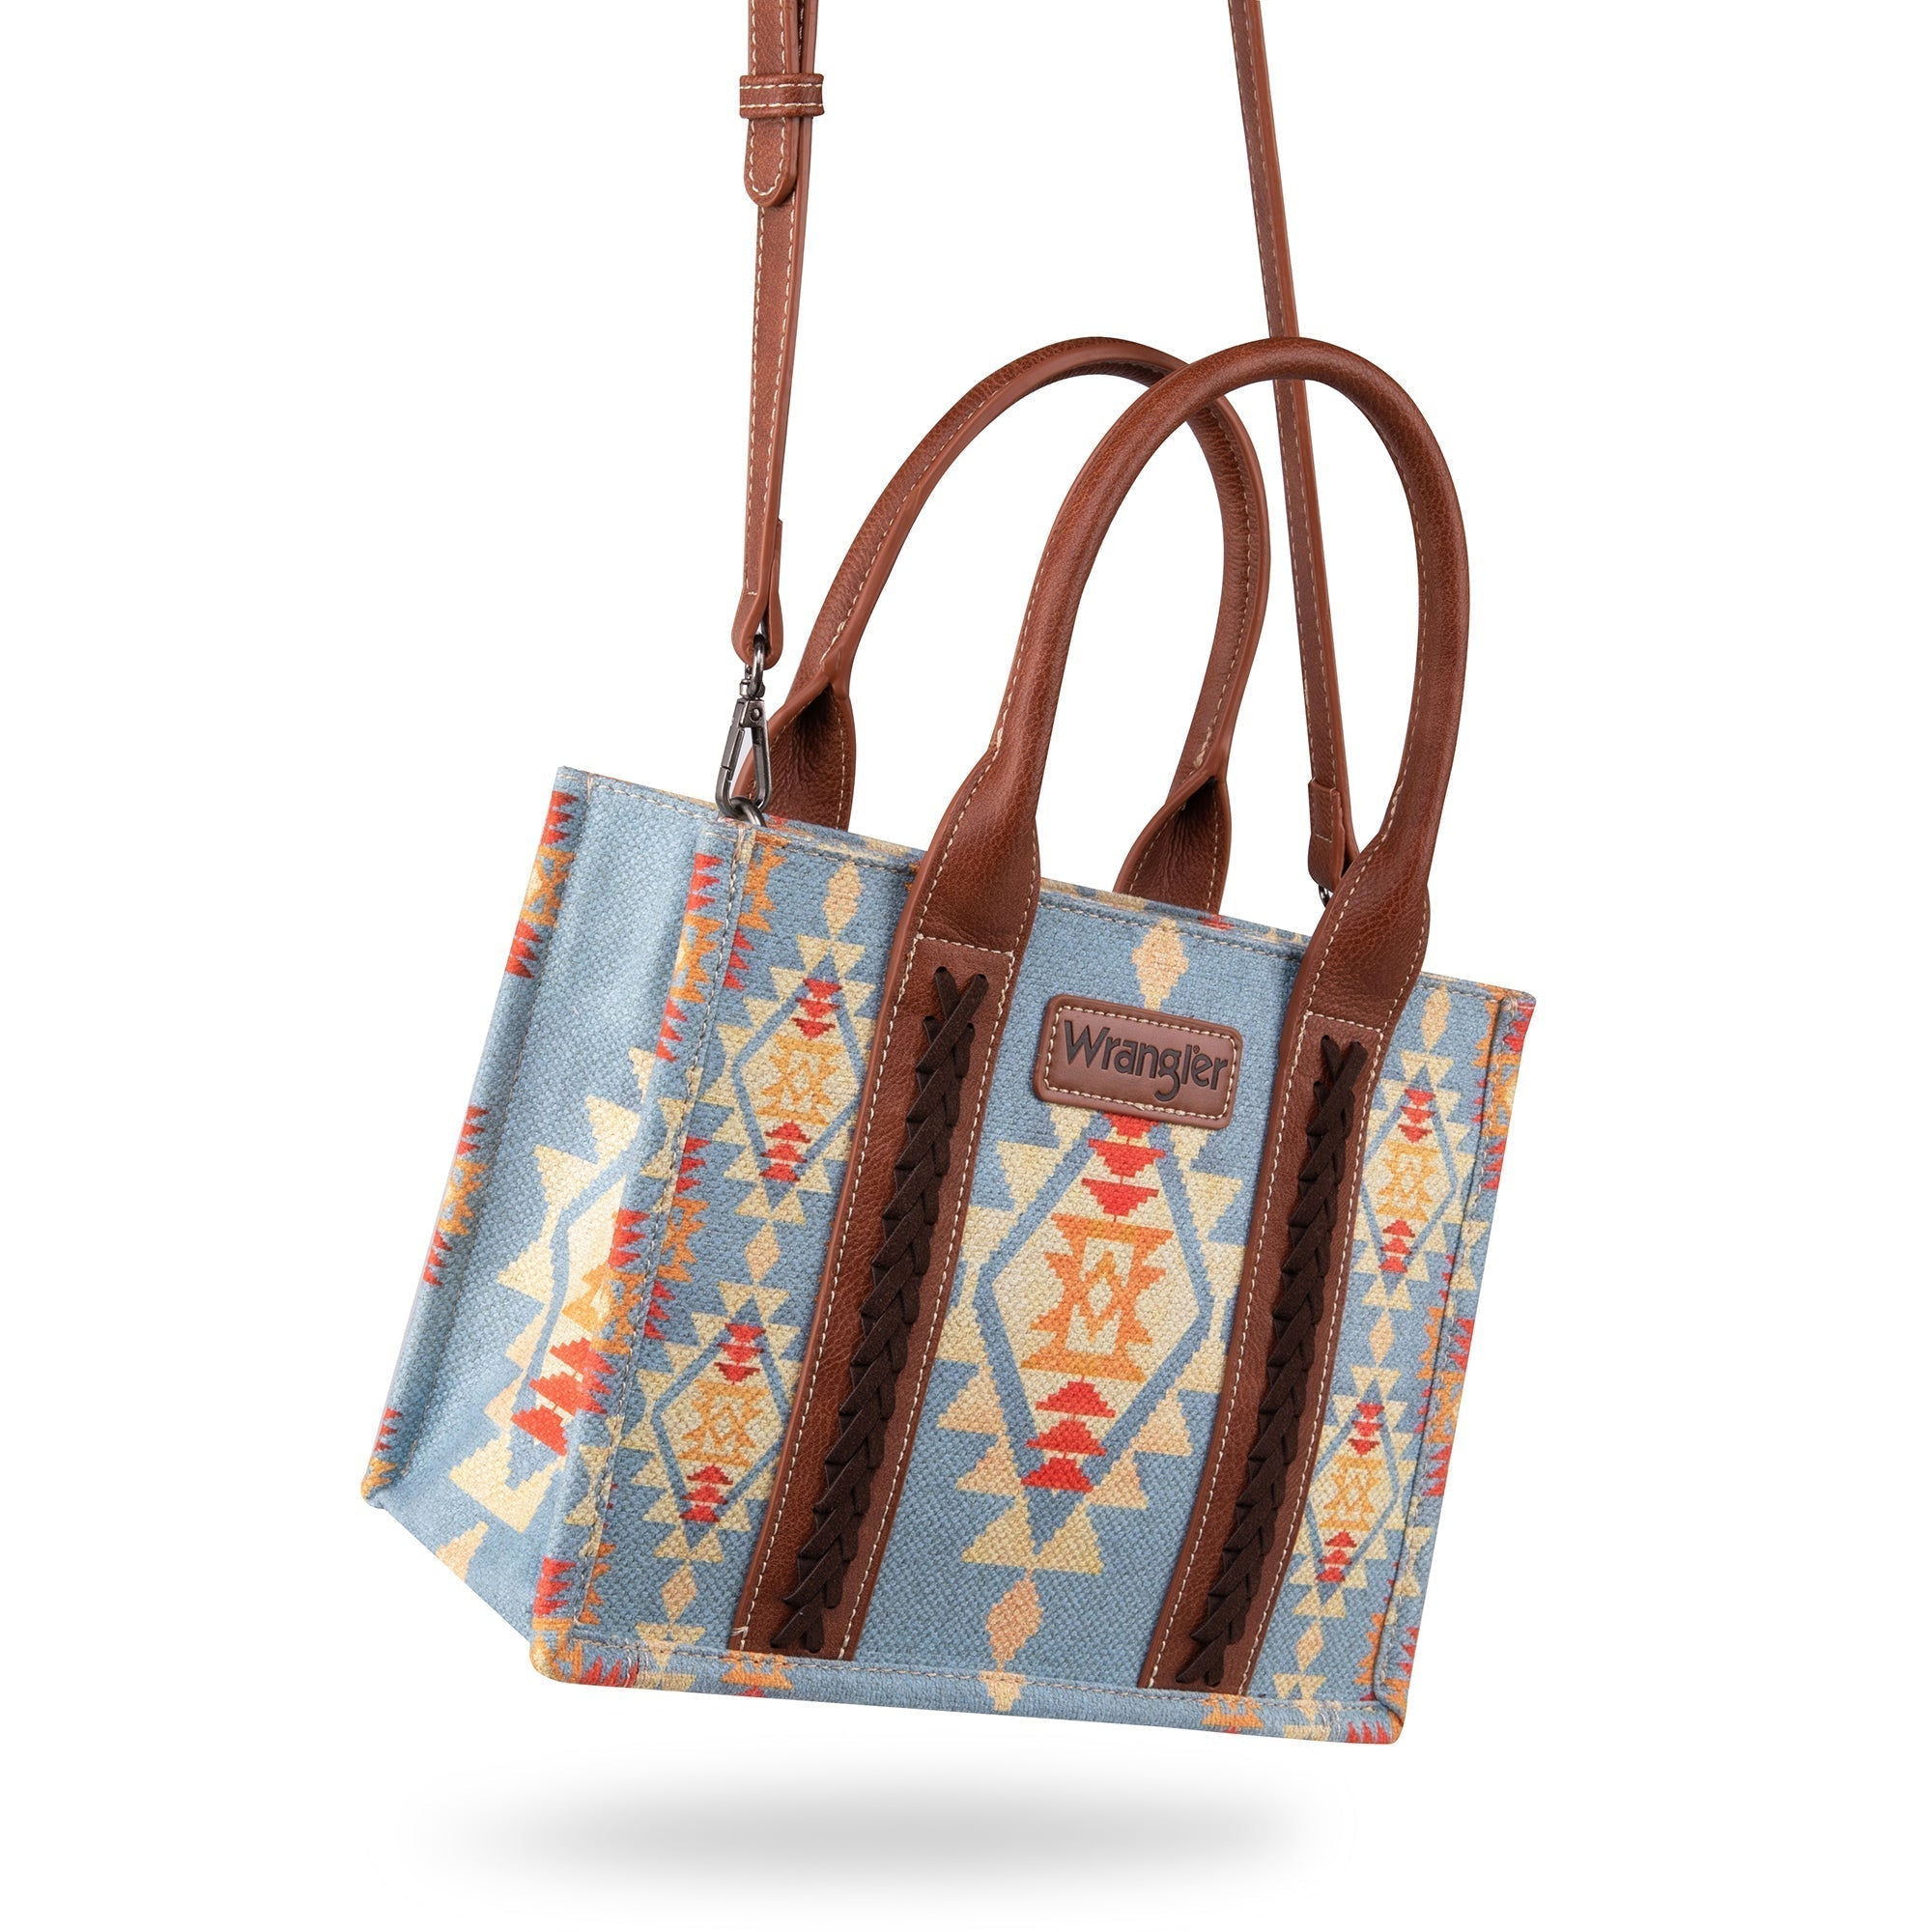 Wrangler Southwestern Dual Sided Print Canvas Wide Tote and Small Tote/Crossbody Set - Cowgirl Wear